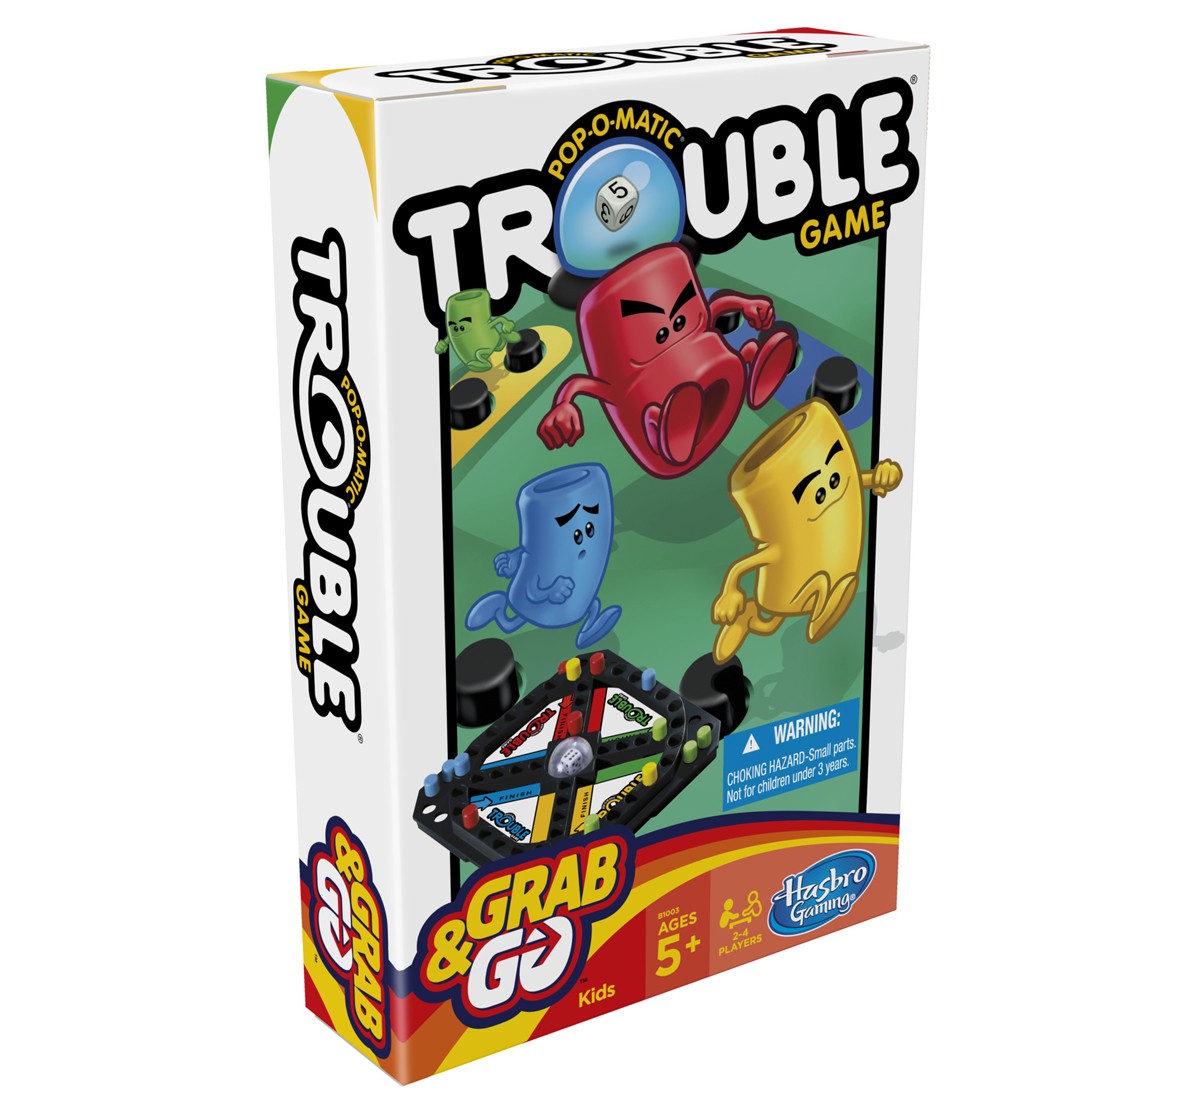 Hasbro Gaming Pop O Matic Trouble Grab and Go Game Multicolor 8Y+